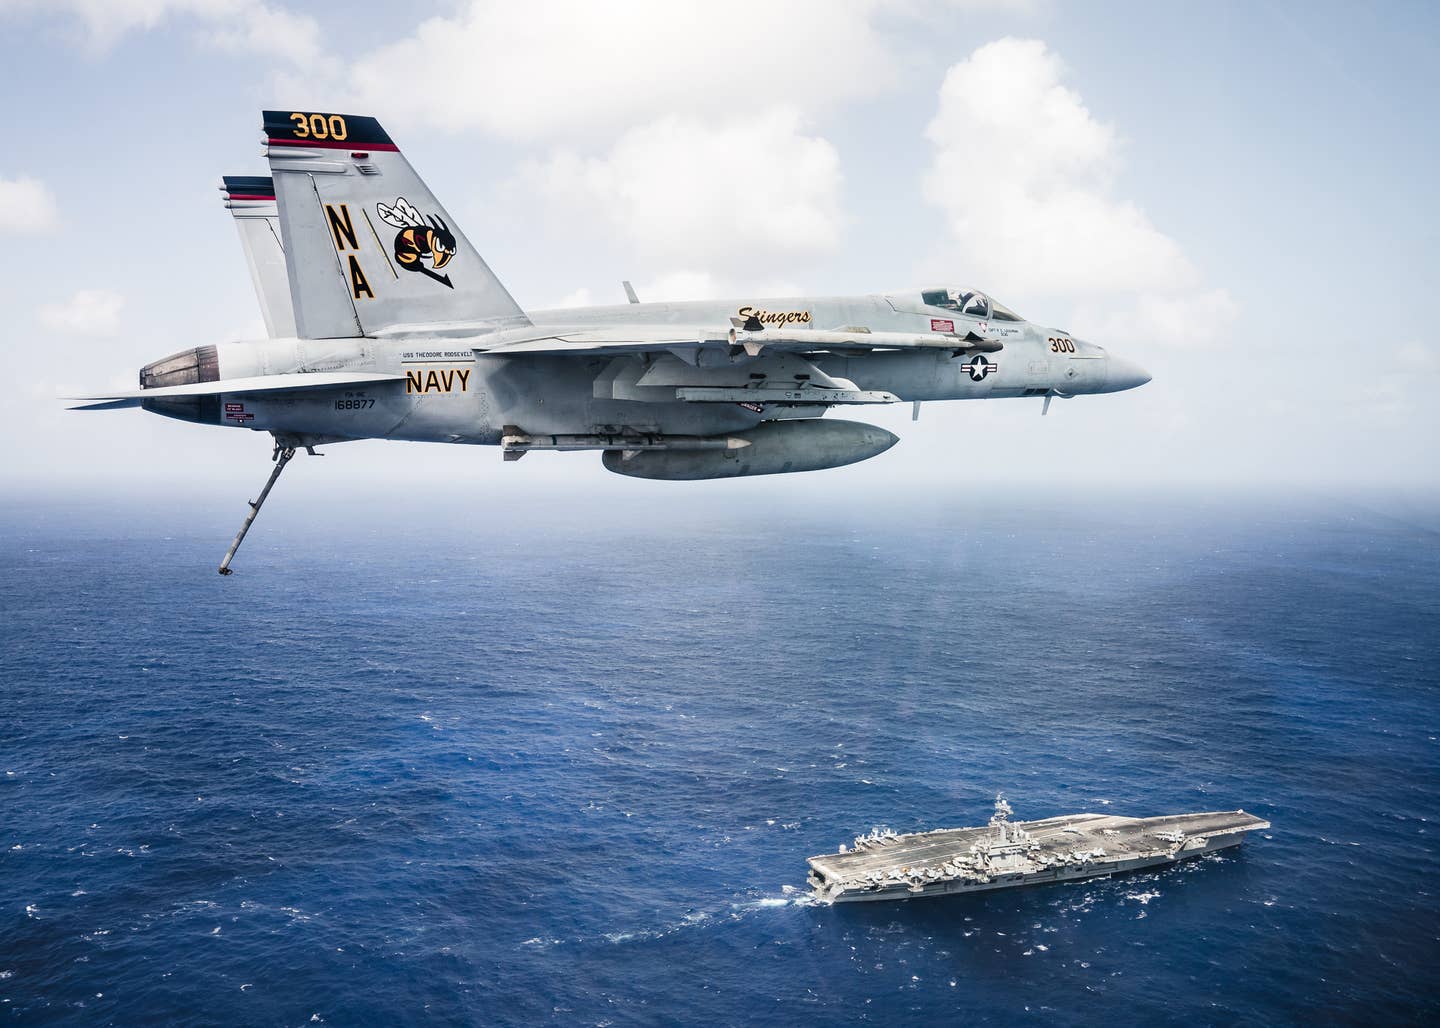 An F/A-18E Super Hornet, assigned to VFA-113 flies over the USS <em>Theodore Roosevelt</em> in October 2017, while the ship was underway in the U.S. 7th Fleet area of operations. <em>U.S. Navy photo by Lt. Aaron B. Hicks/Released</em>